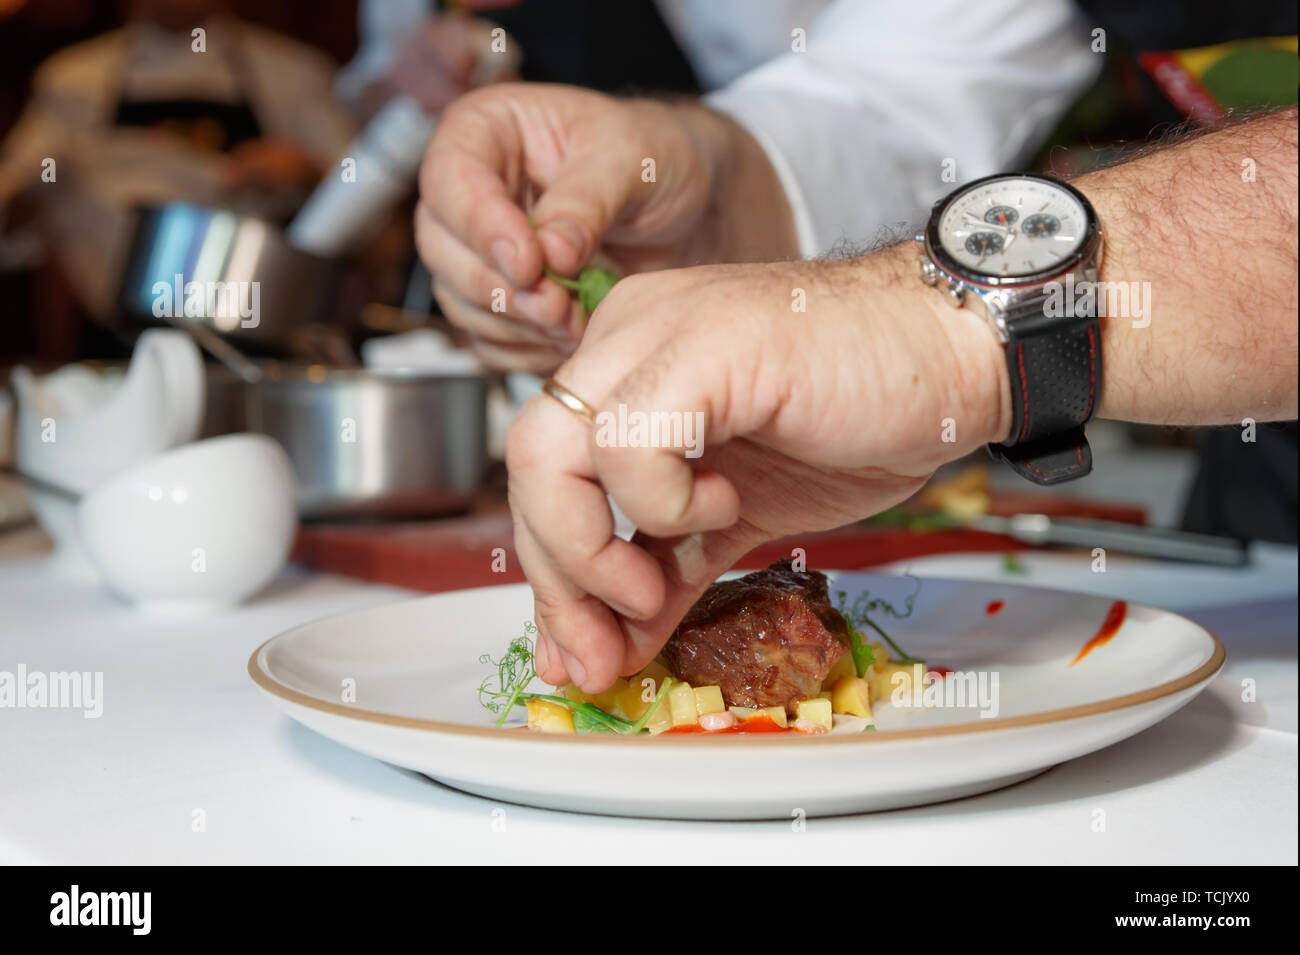 Chef is cooking an elegant meat dish Stock Photo